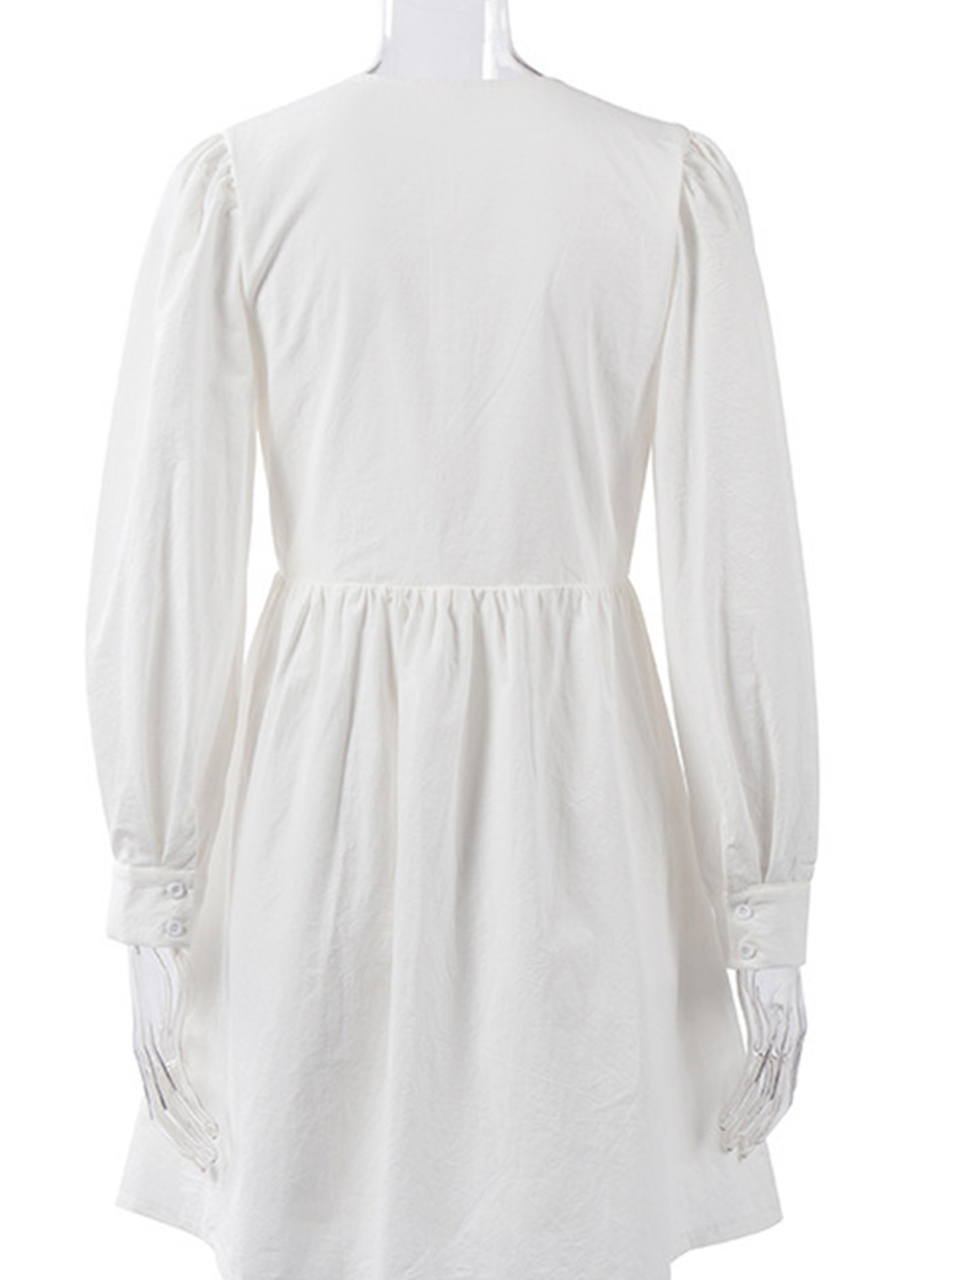 Women's Dress With Deep V-Neck And Bubble Sleeves